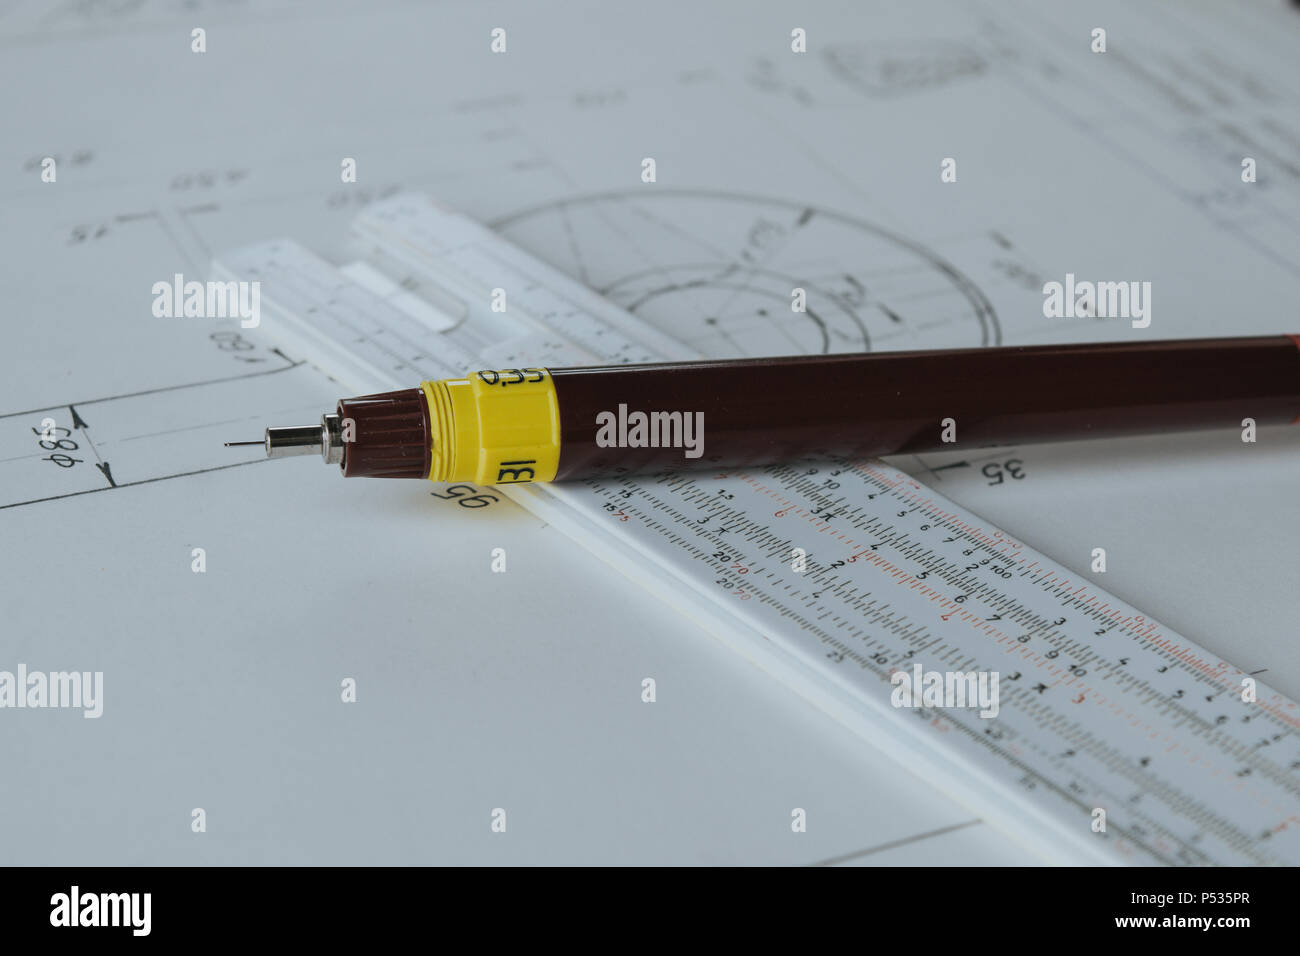 Technical pen (rapidograph) on slide rule and technical drawing Stock Photo